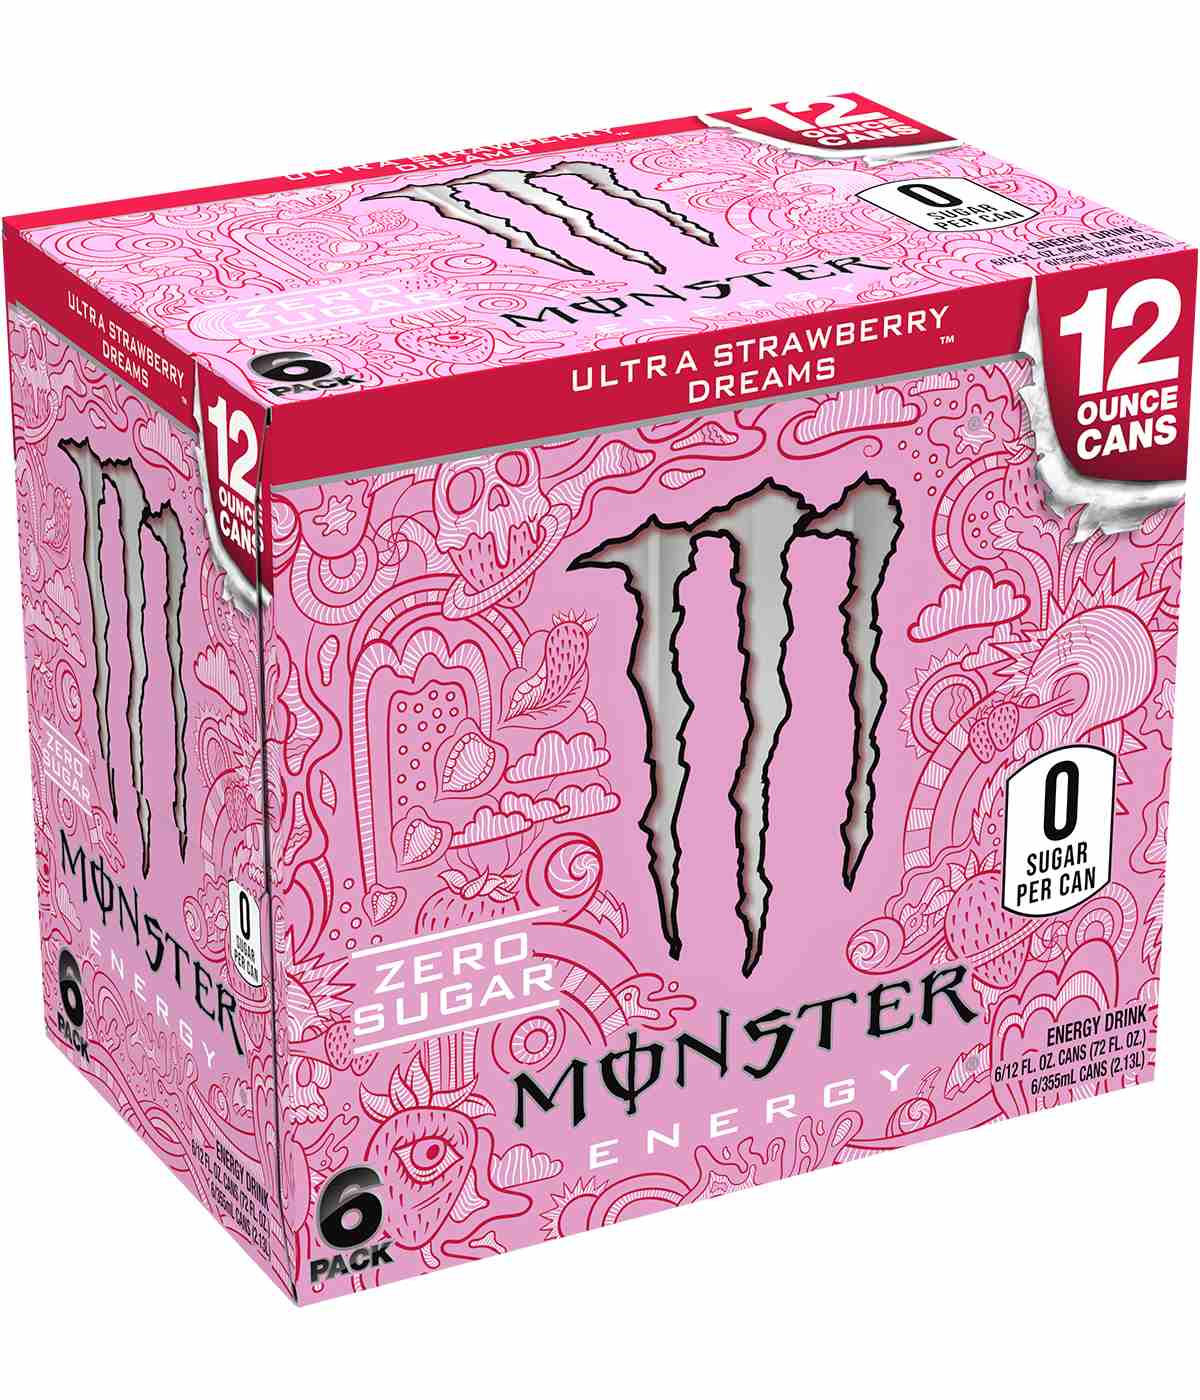 Monster Energy Ultra Strawberry Dreams Energy Drink 12 oz Cans; image 2 of 2